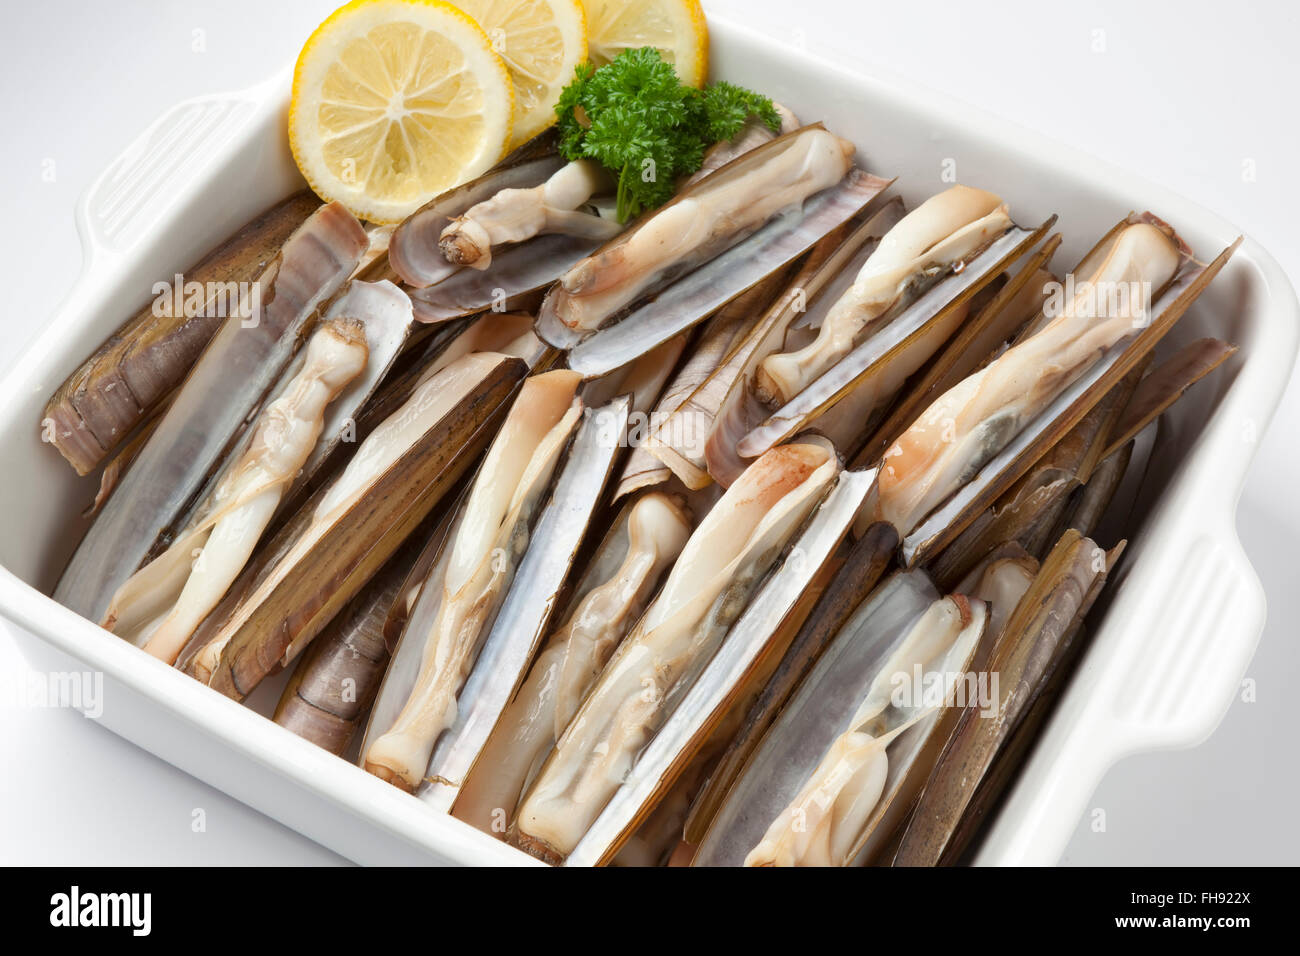 Dish with fresh cooked razor clams close up on white background Stock Photo